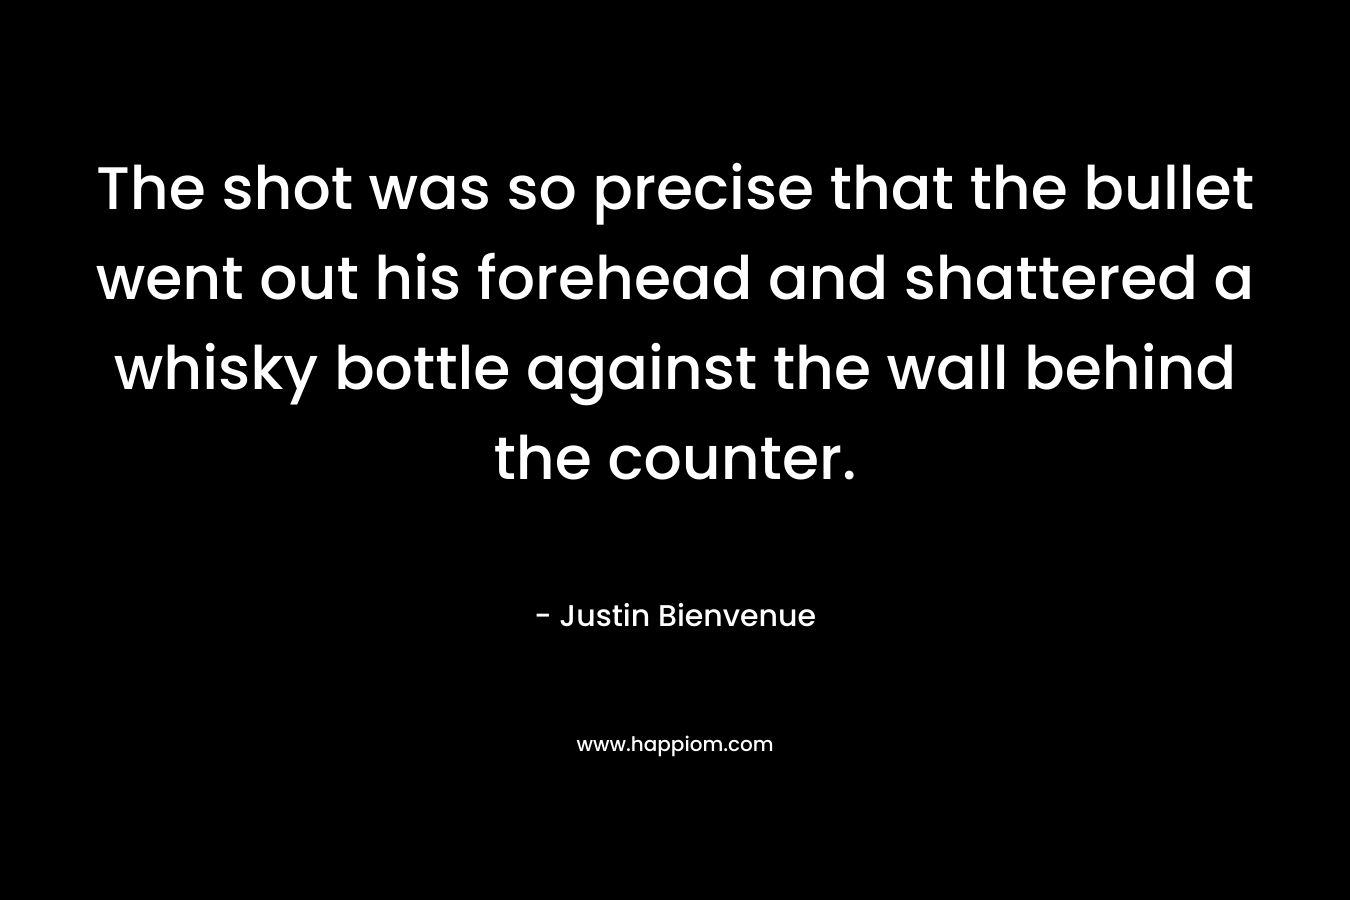 The shot was so precise that the bullet went out his forehead and shattered a whisky bottle against the wall behind the counter.